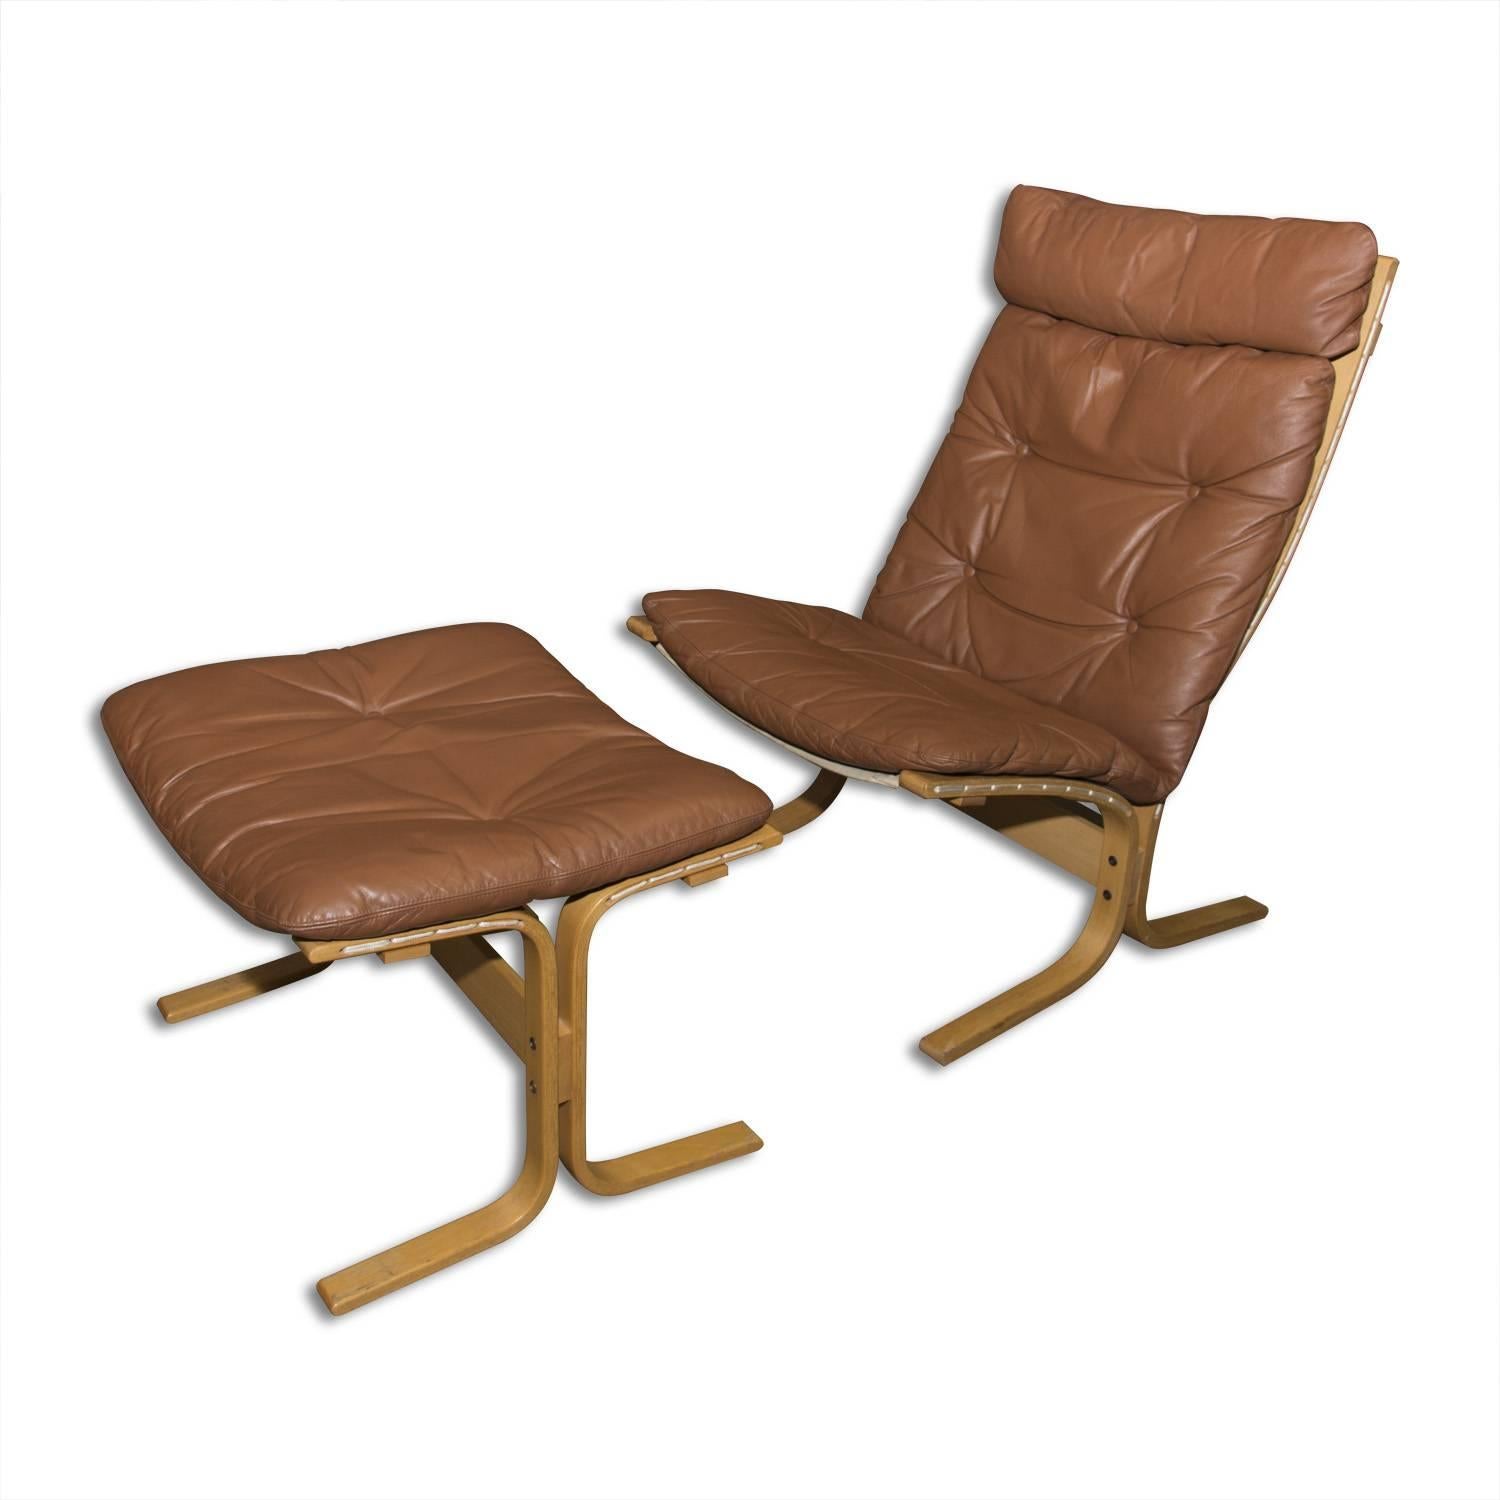 Lounge leather chair “Siesta” and ottoman designed by Norwegian designer Ingmar Relling for Westnofa in the 1960s. The ‘Siesta Chair’ won first prize at the Norwegian Furniture Council Competition in 1965. The set is in very good Vintage condition